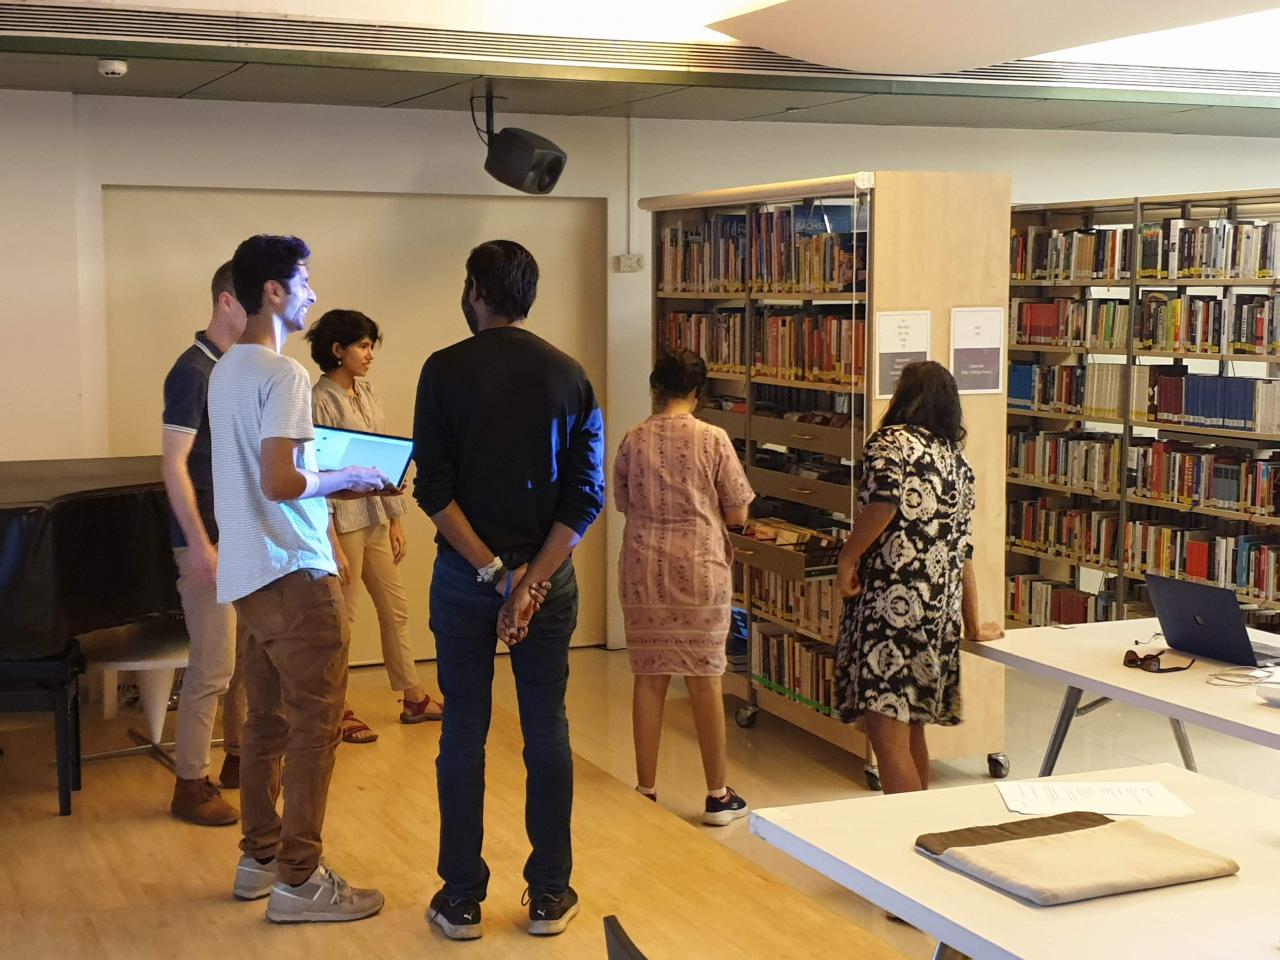 Many people can be seen in a library room during a ZKM workshop at the Goethe-Institut in Mumbai.